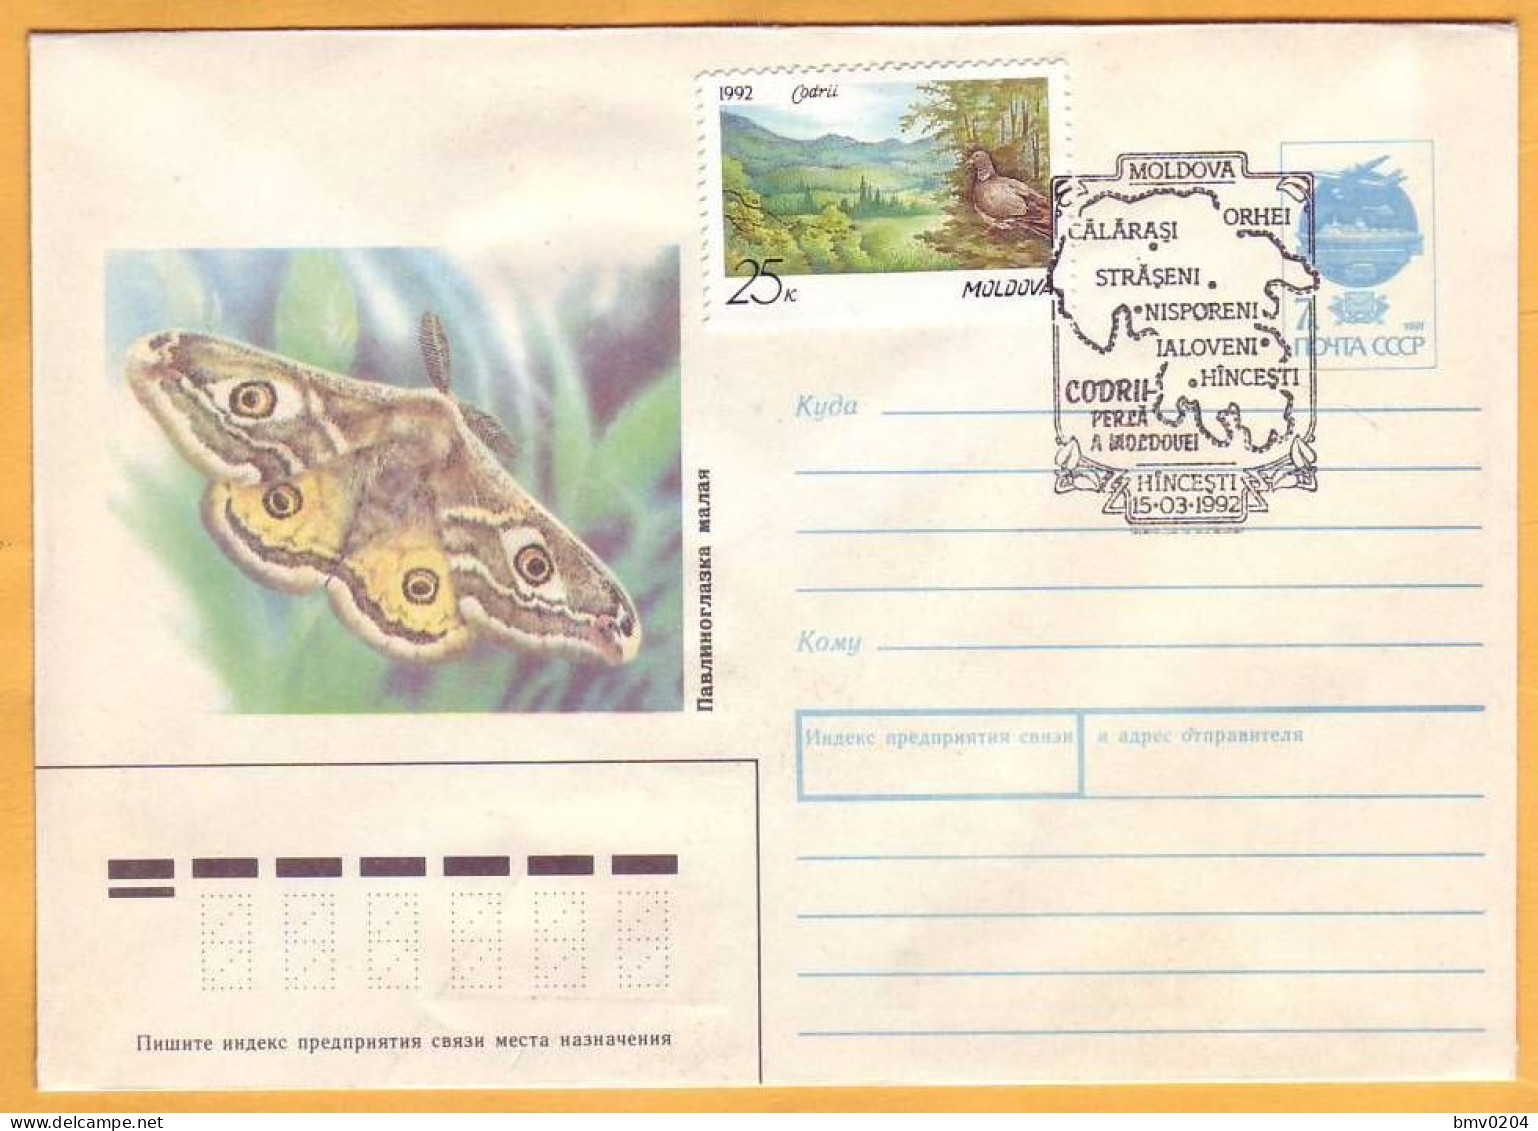 1992 Moldova Moldavie 3 Lots Special Cancellations Kodrii Moldova. Forest. Wood Pigeon Butterfly (1 Cover+2 Postcard) - Gallinacées & Faisans